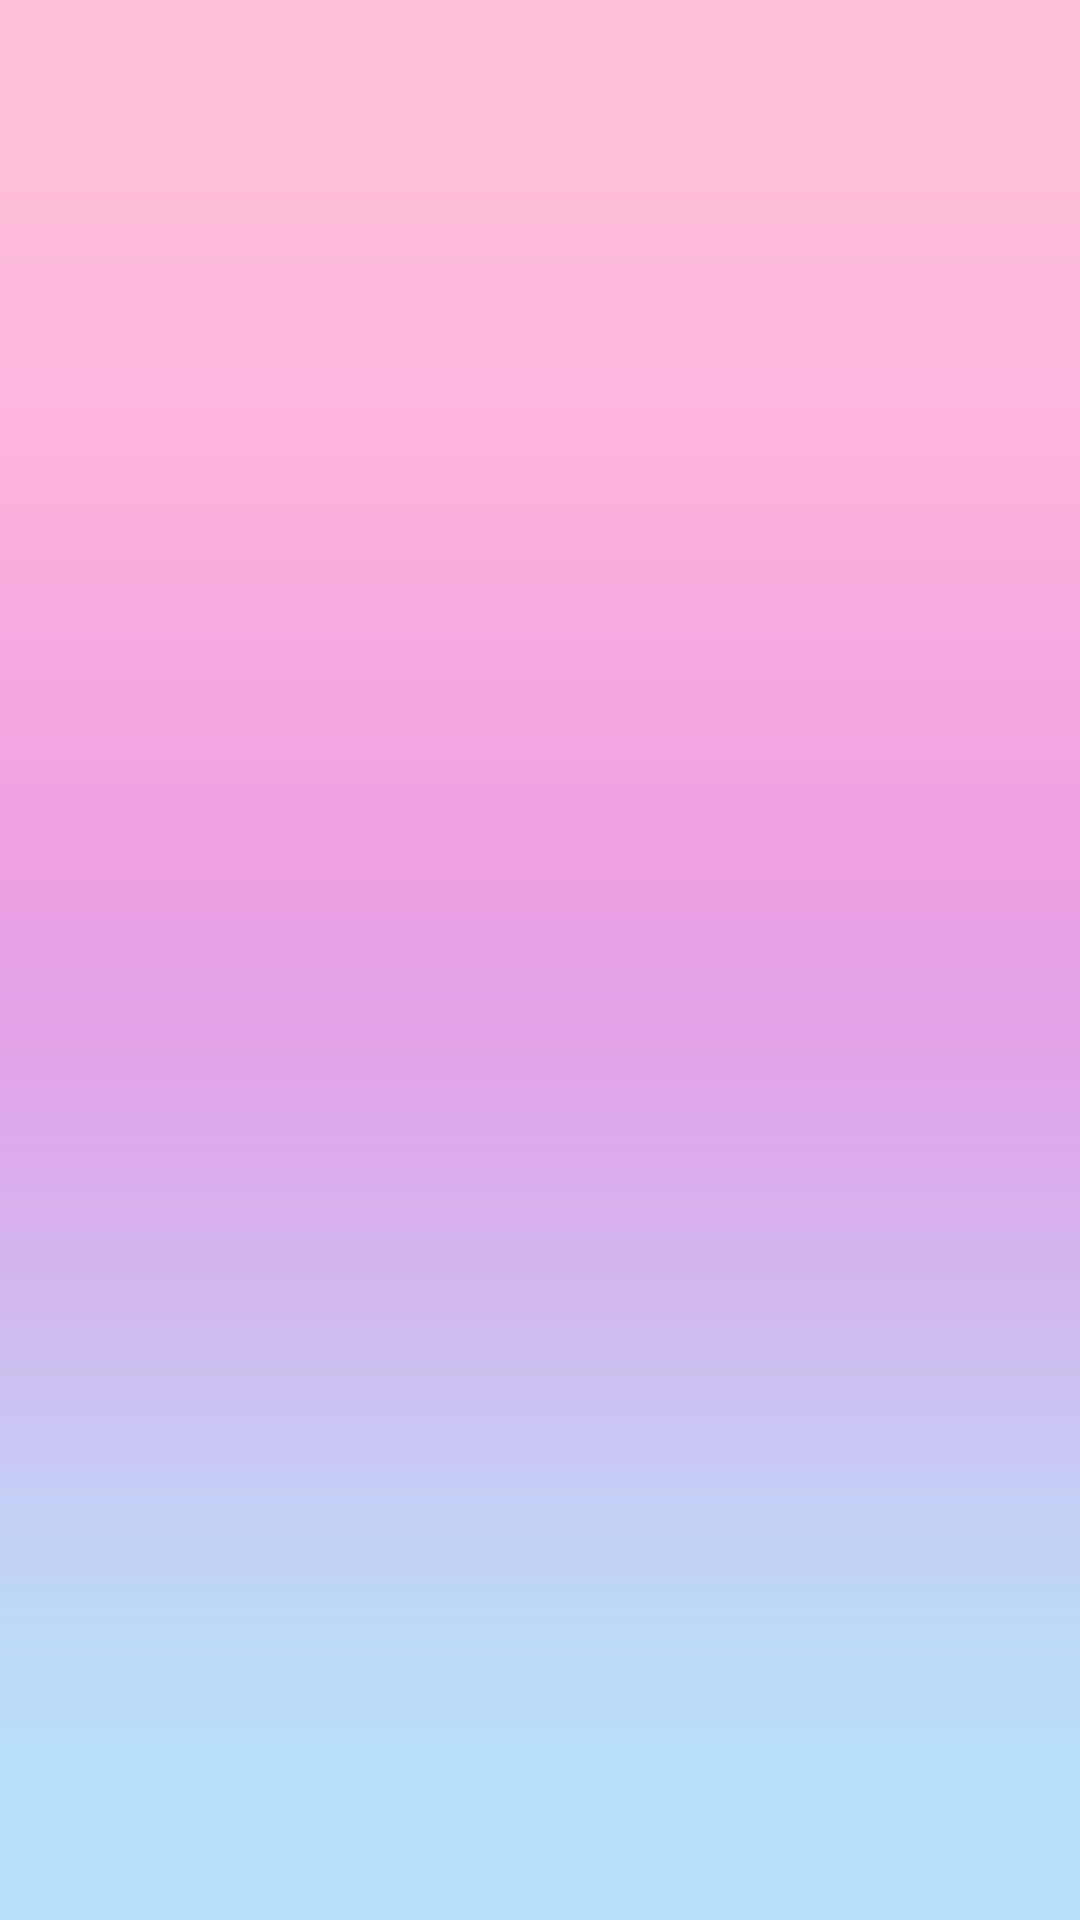 A Pink And Blue Gradient Wallpaper